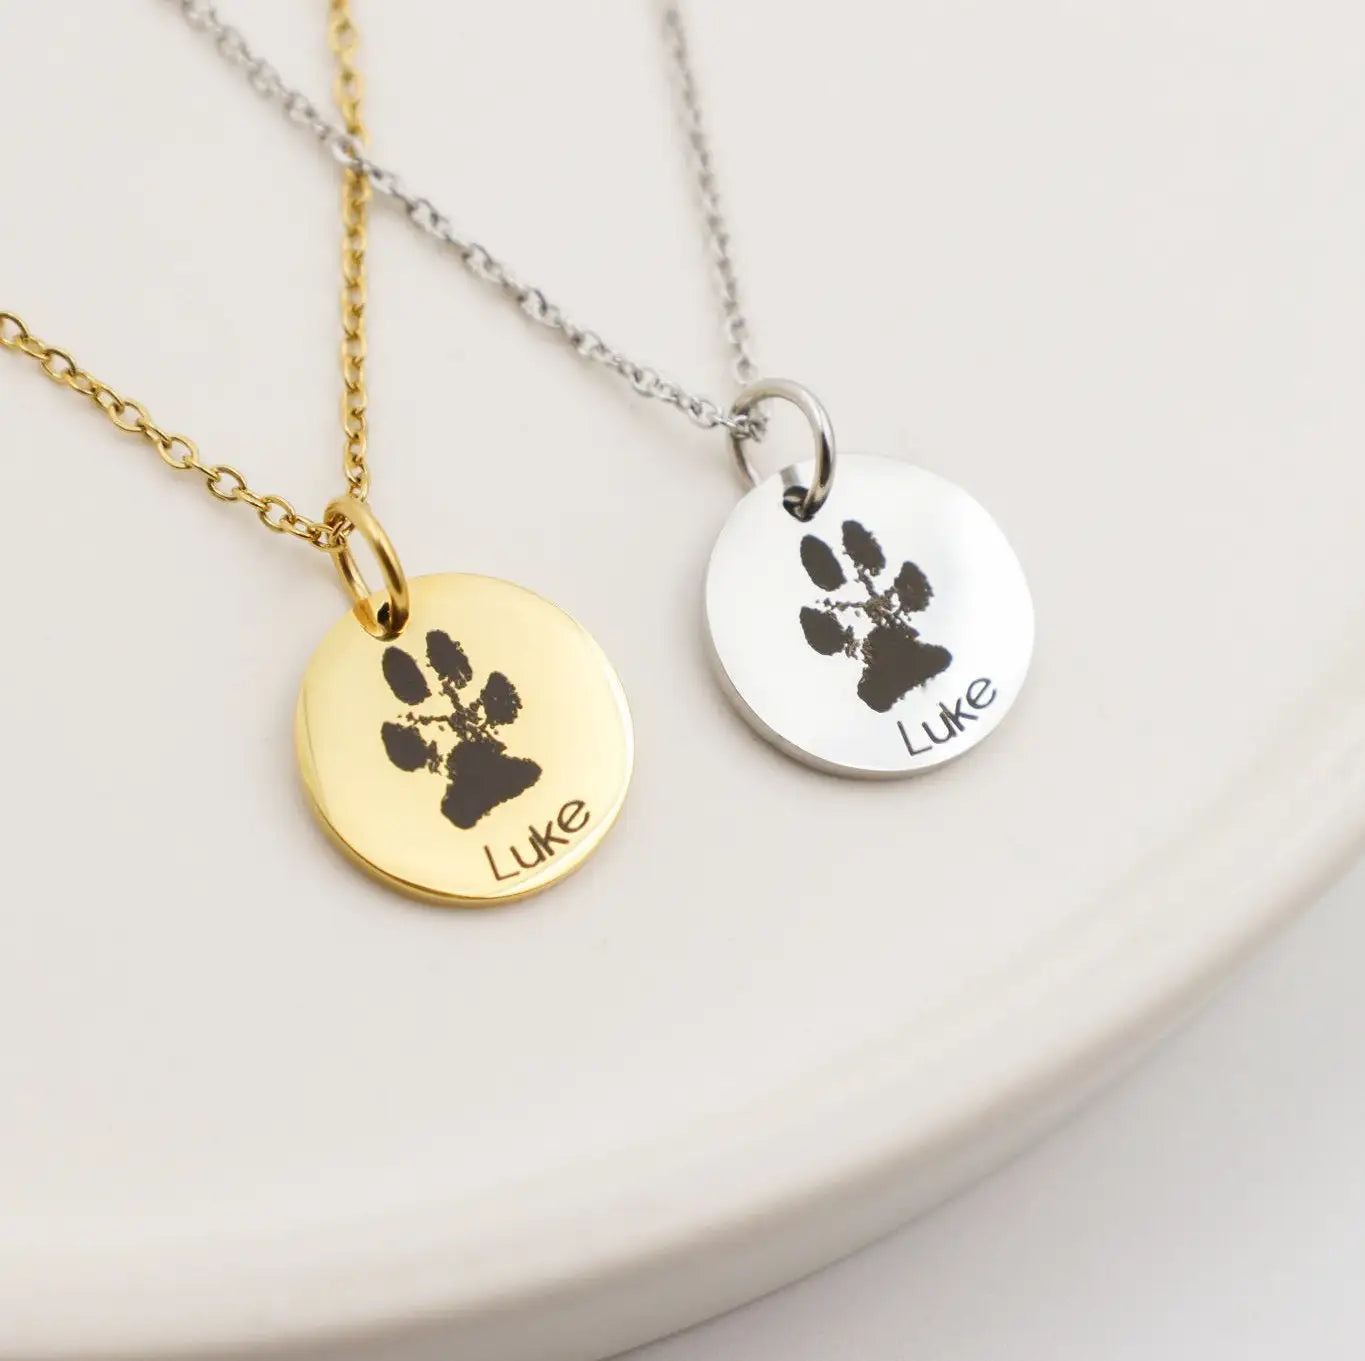 Actual Paw Print Necklace